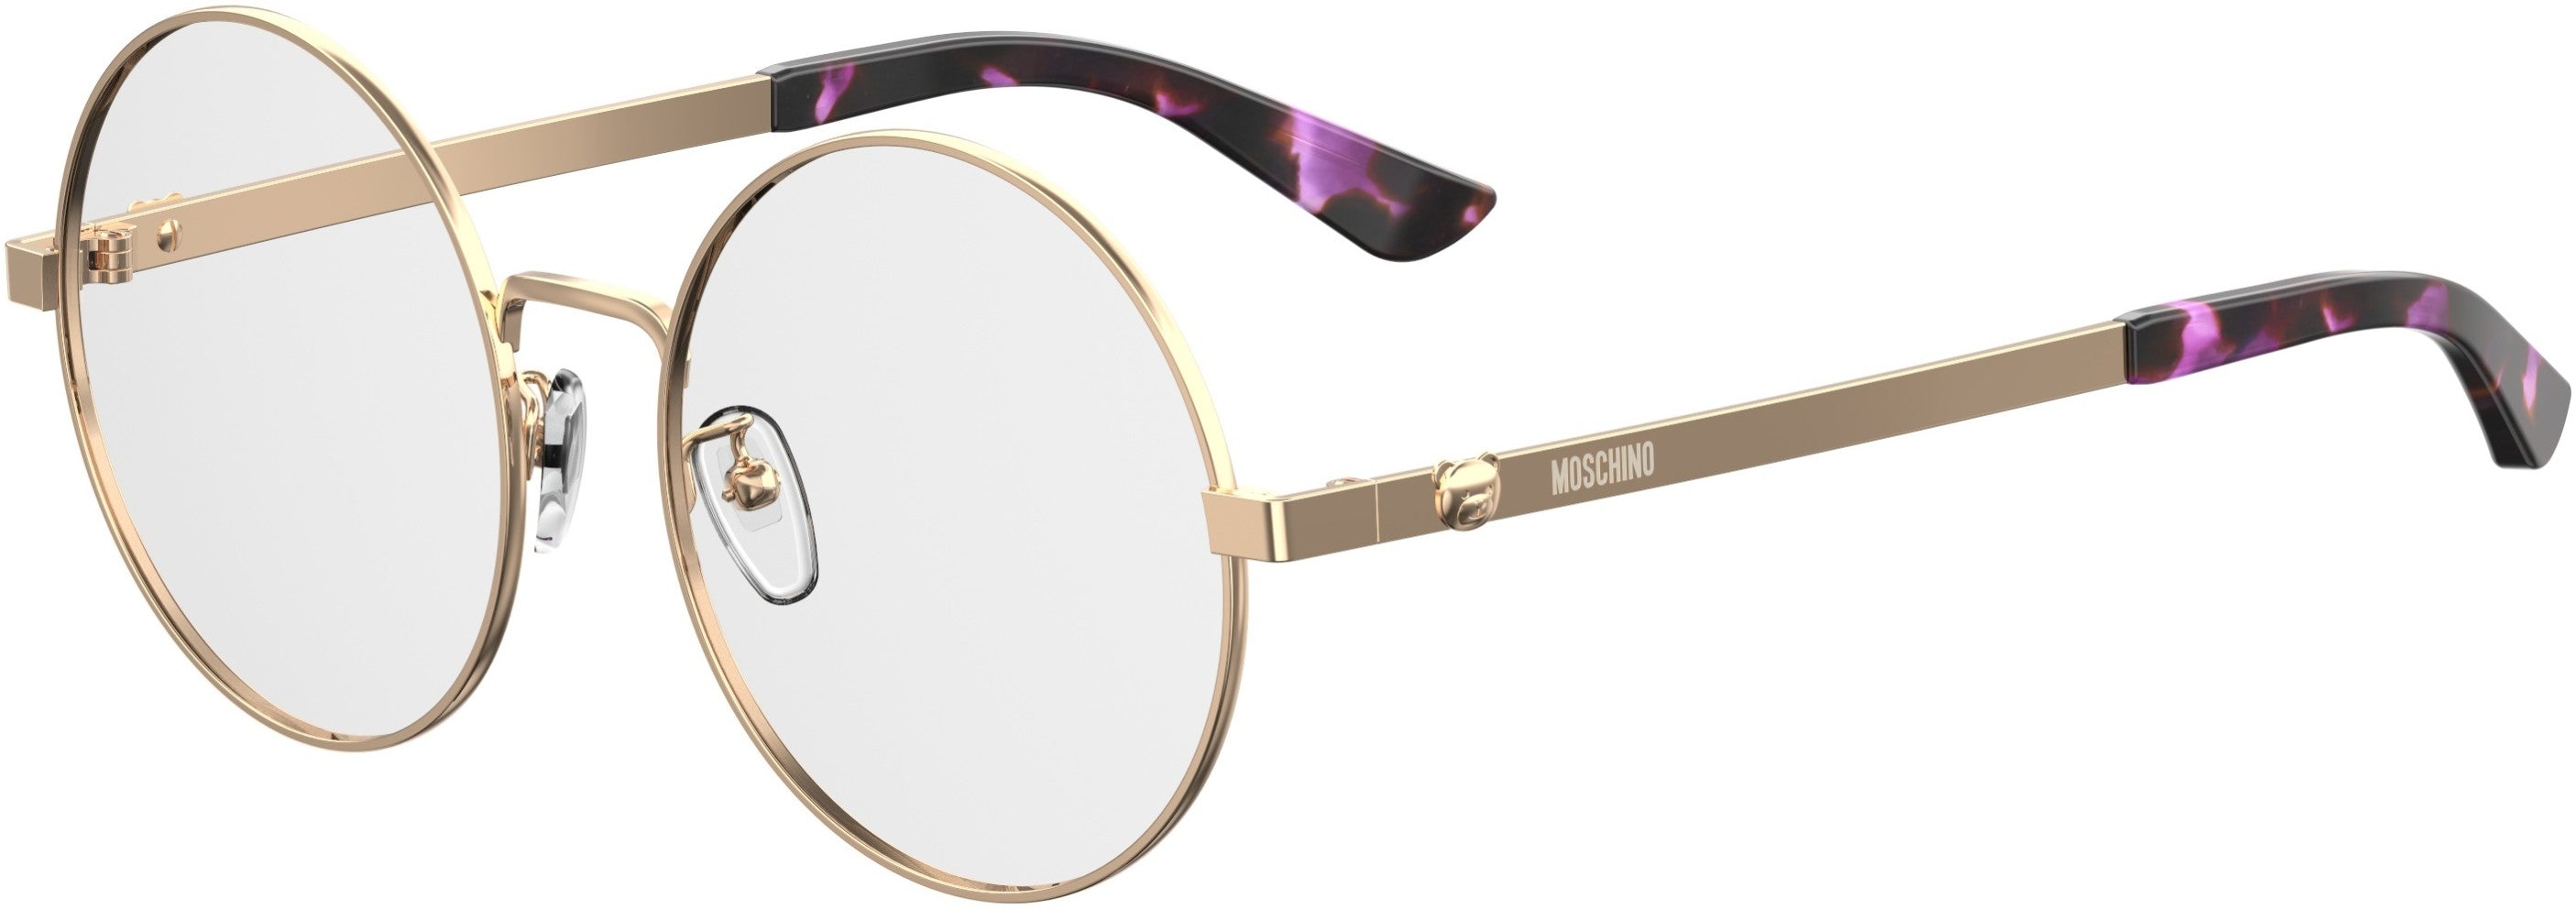  Moschino 538/F Oval Modified Eyeglasses 0000-0000  Rose Gold (00 Demo Lens)